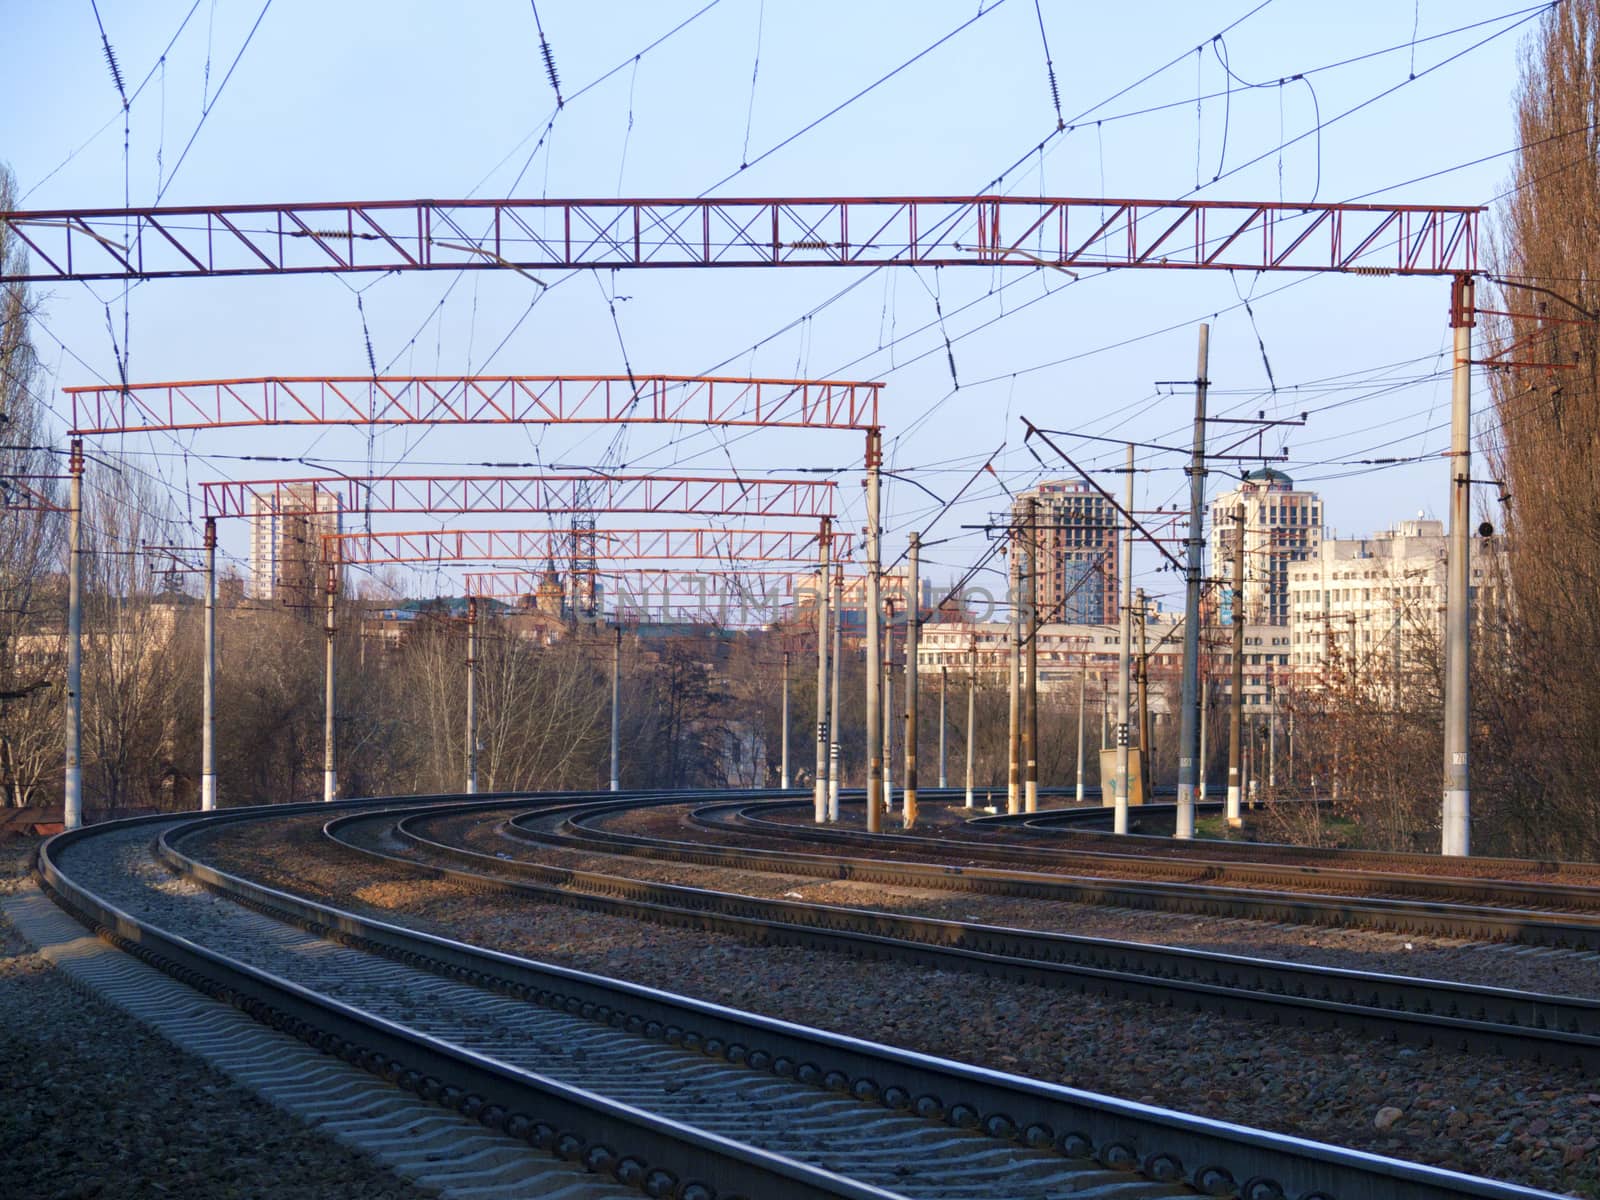 Perspective and turn of a multichannel railway for electric trains by Sergii